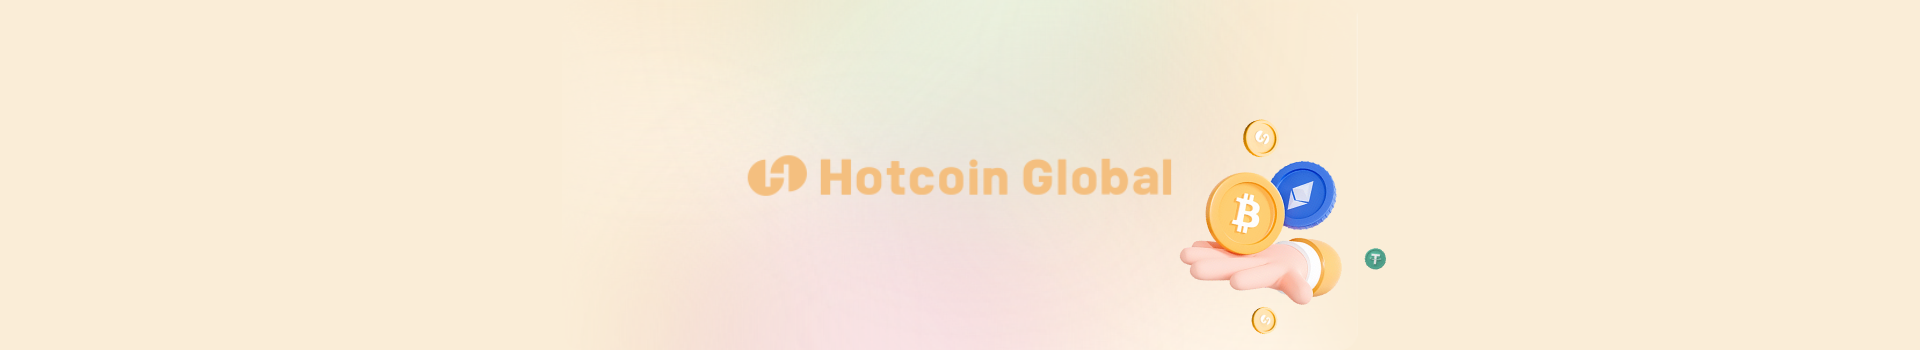 Hotcoin Global Review